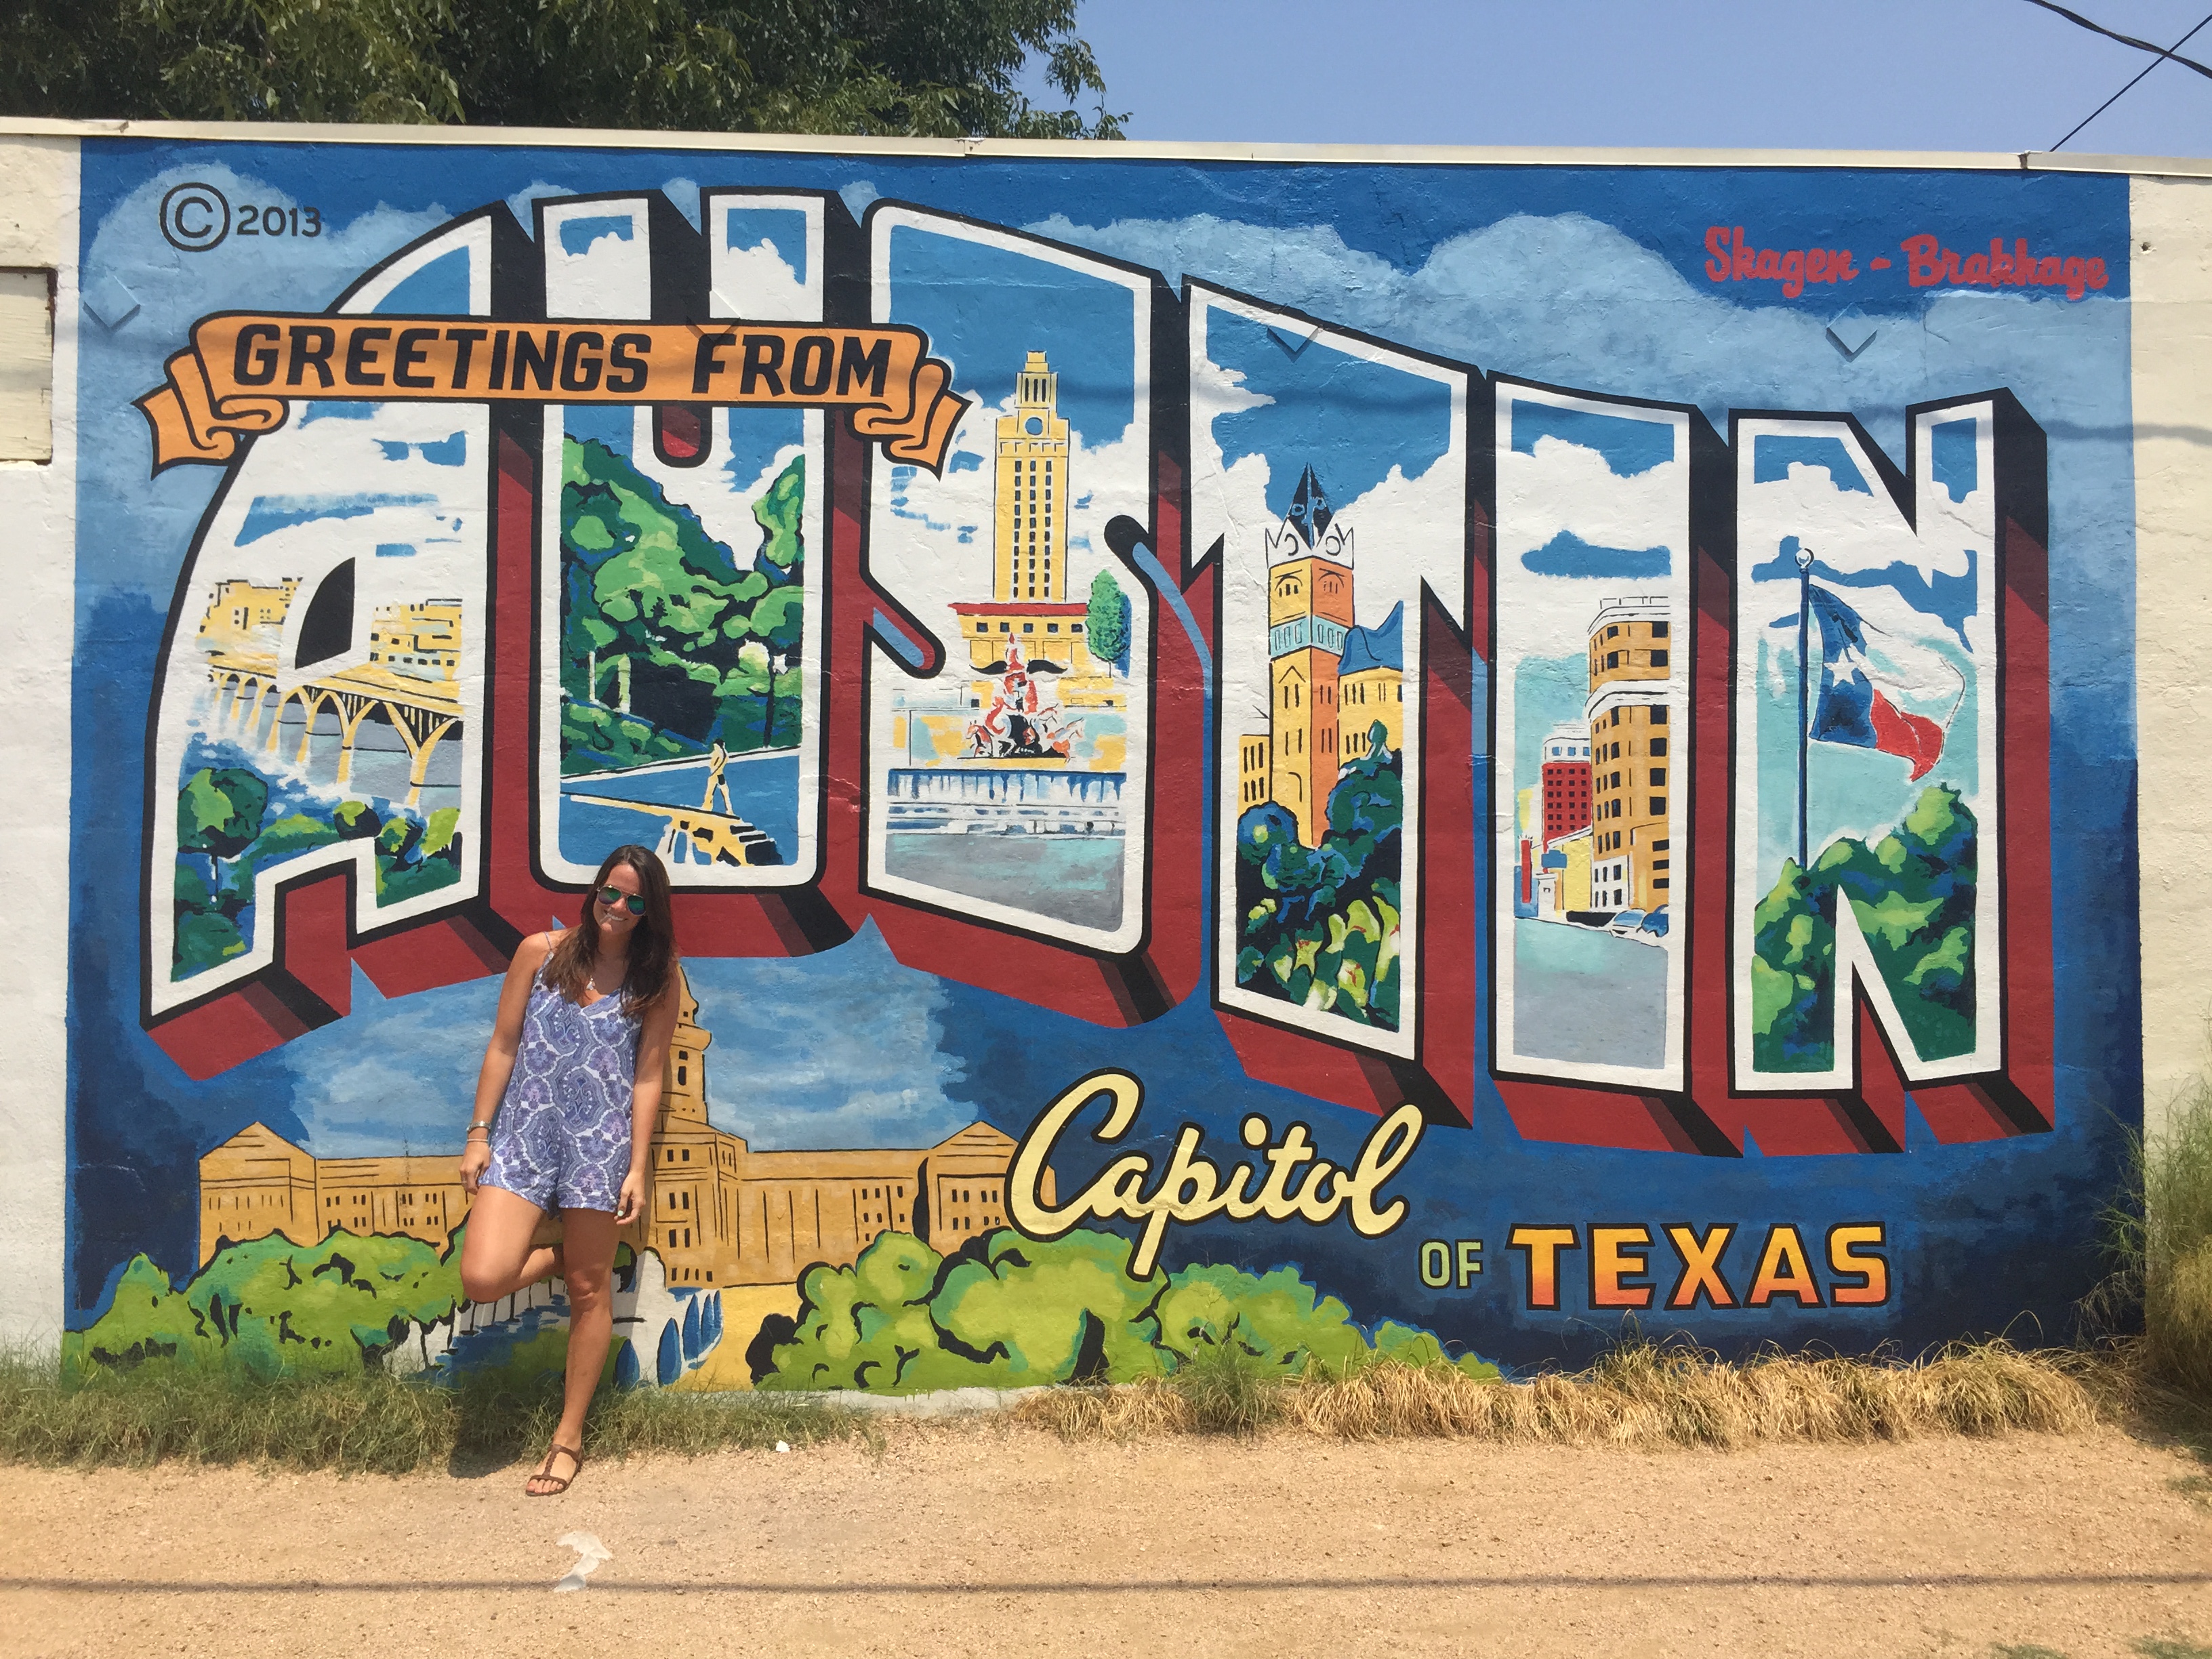 Tips for where to eat and the best outdoor activities in Austin, Texas.